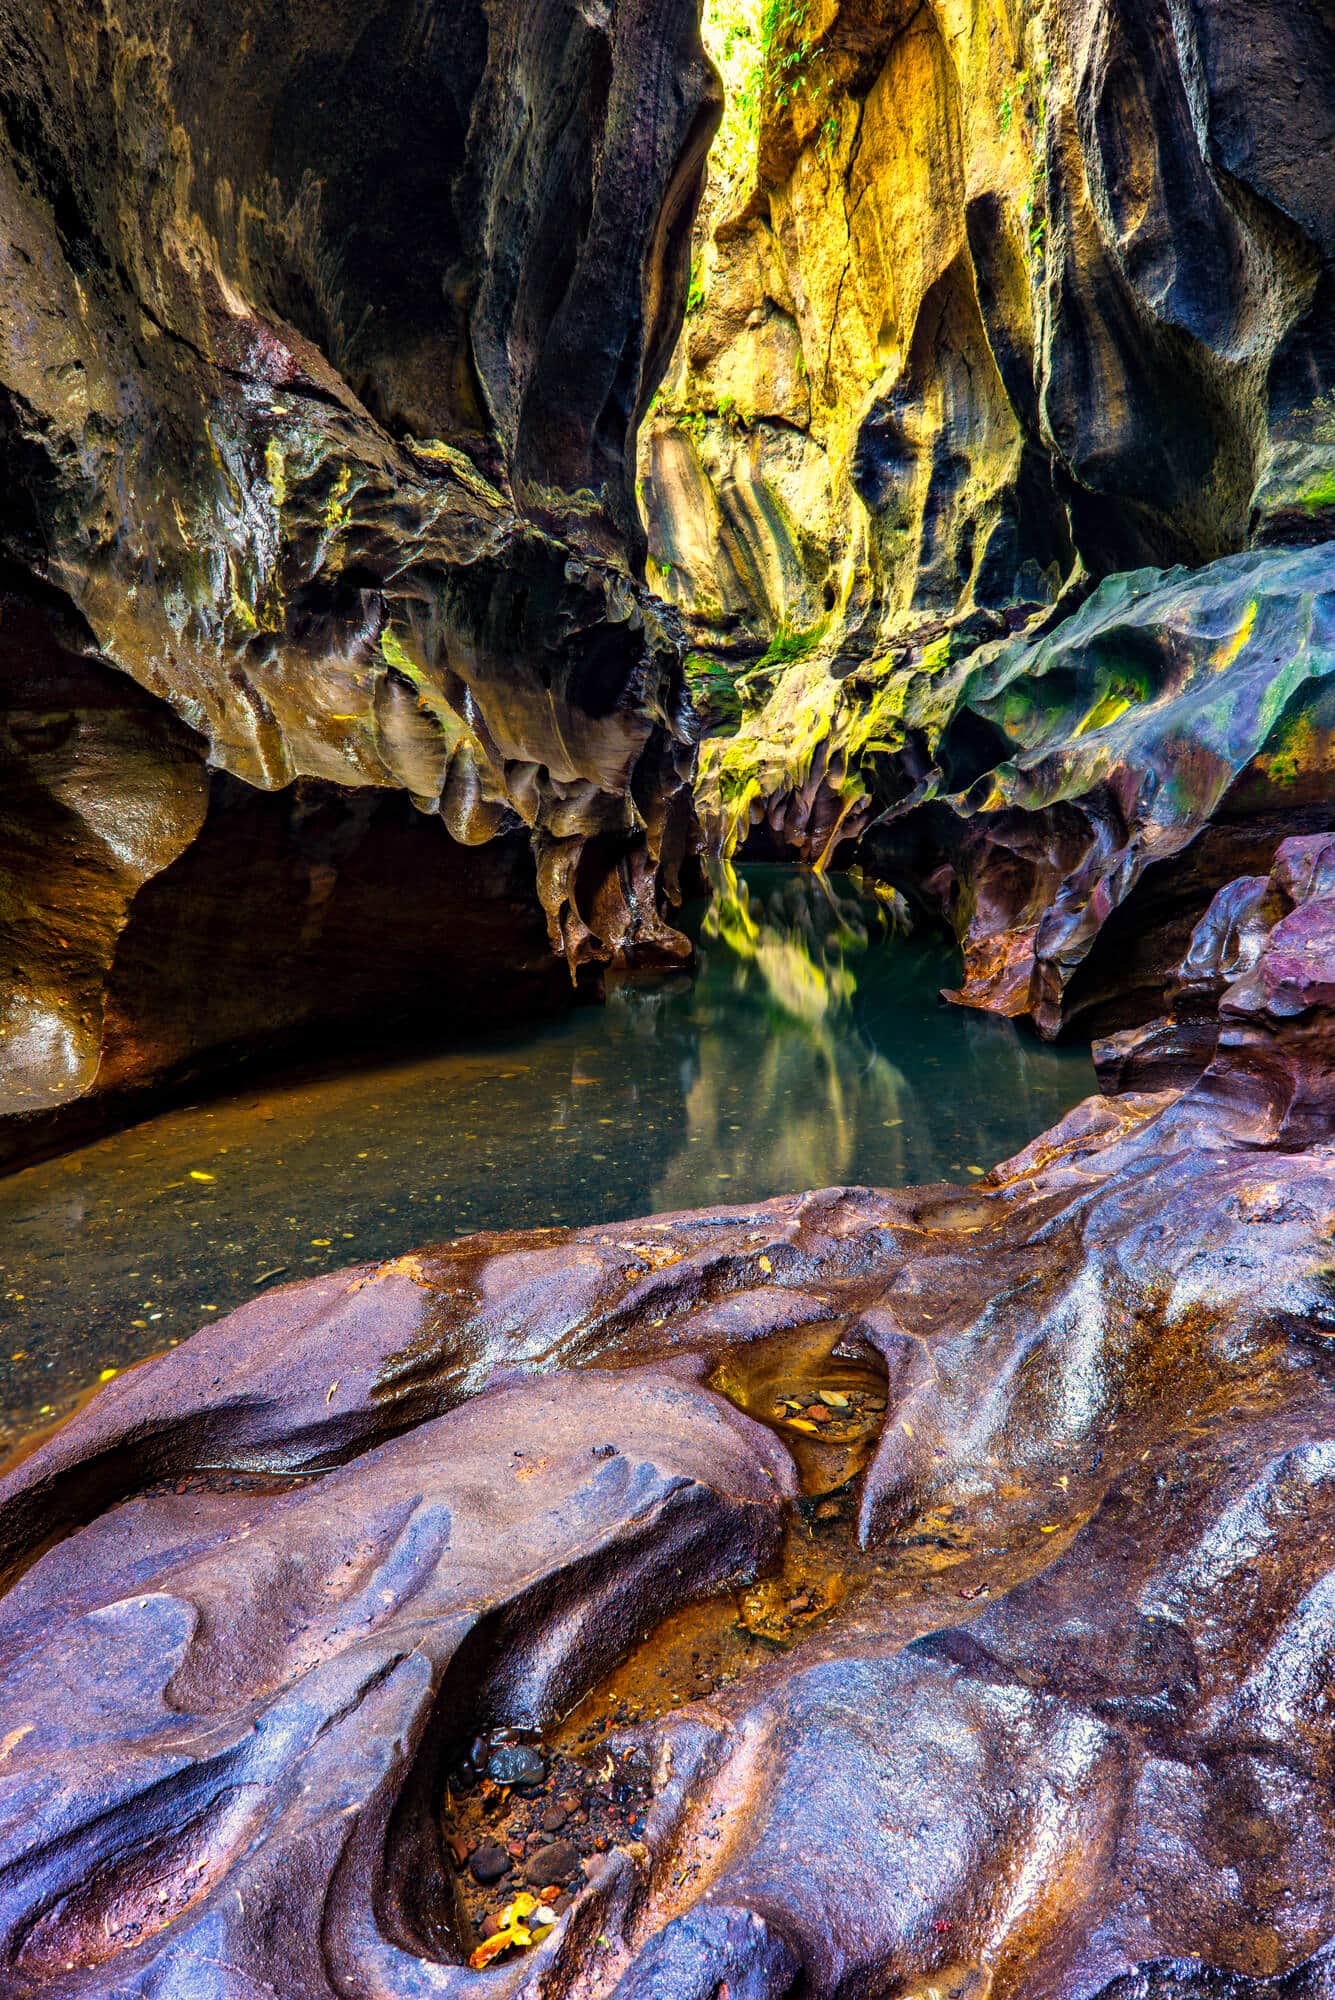 The sacred and hidden canyon og Sukawati - One of the top things to do in East Bali